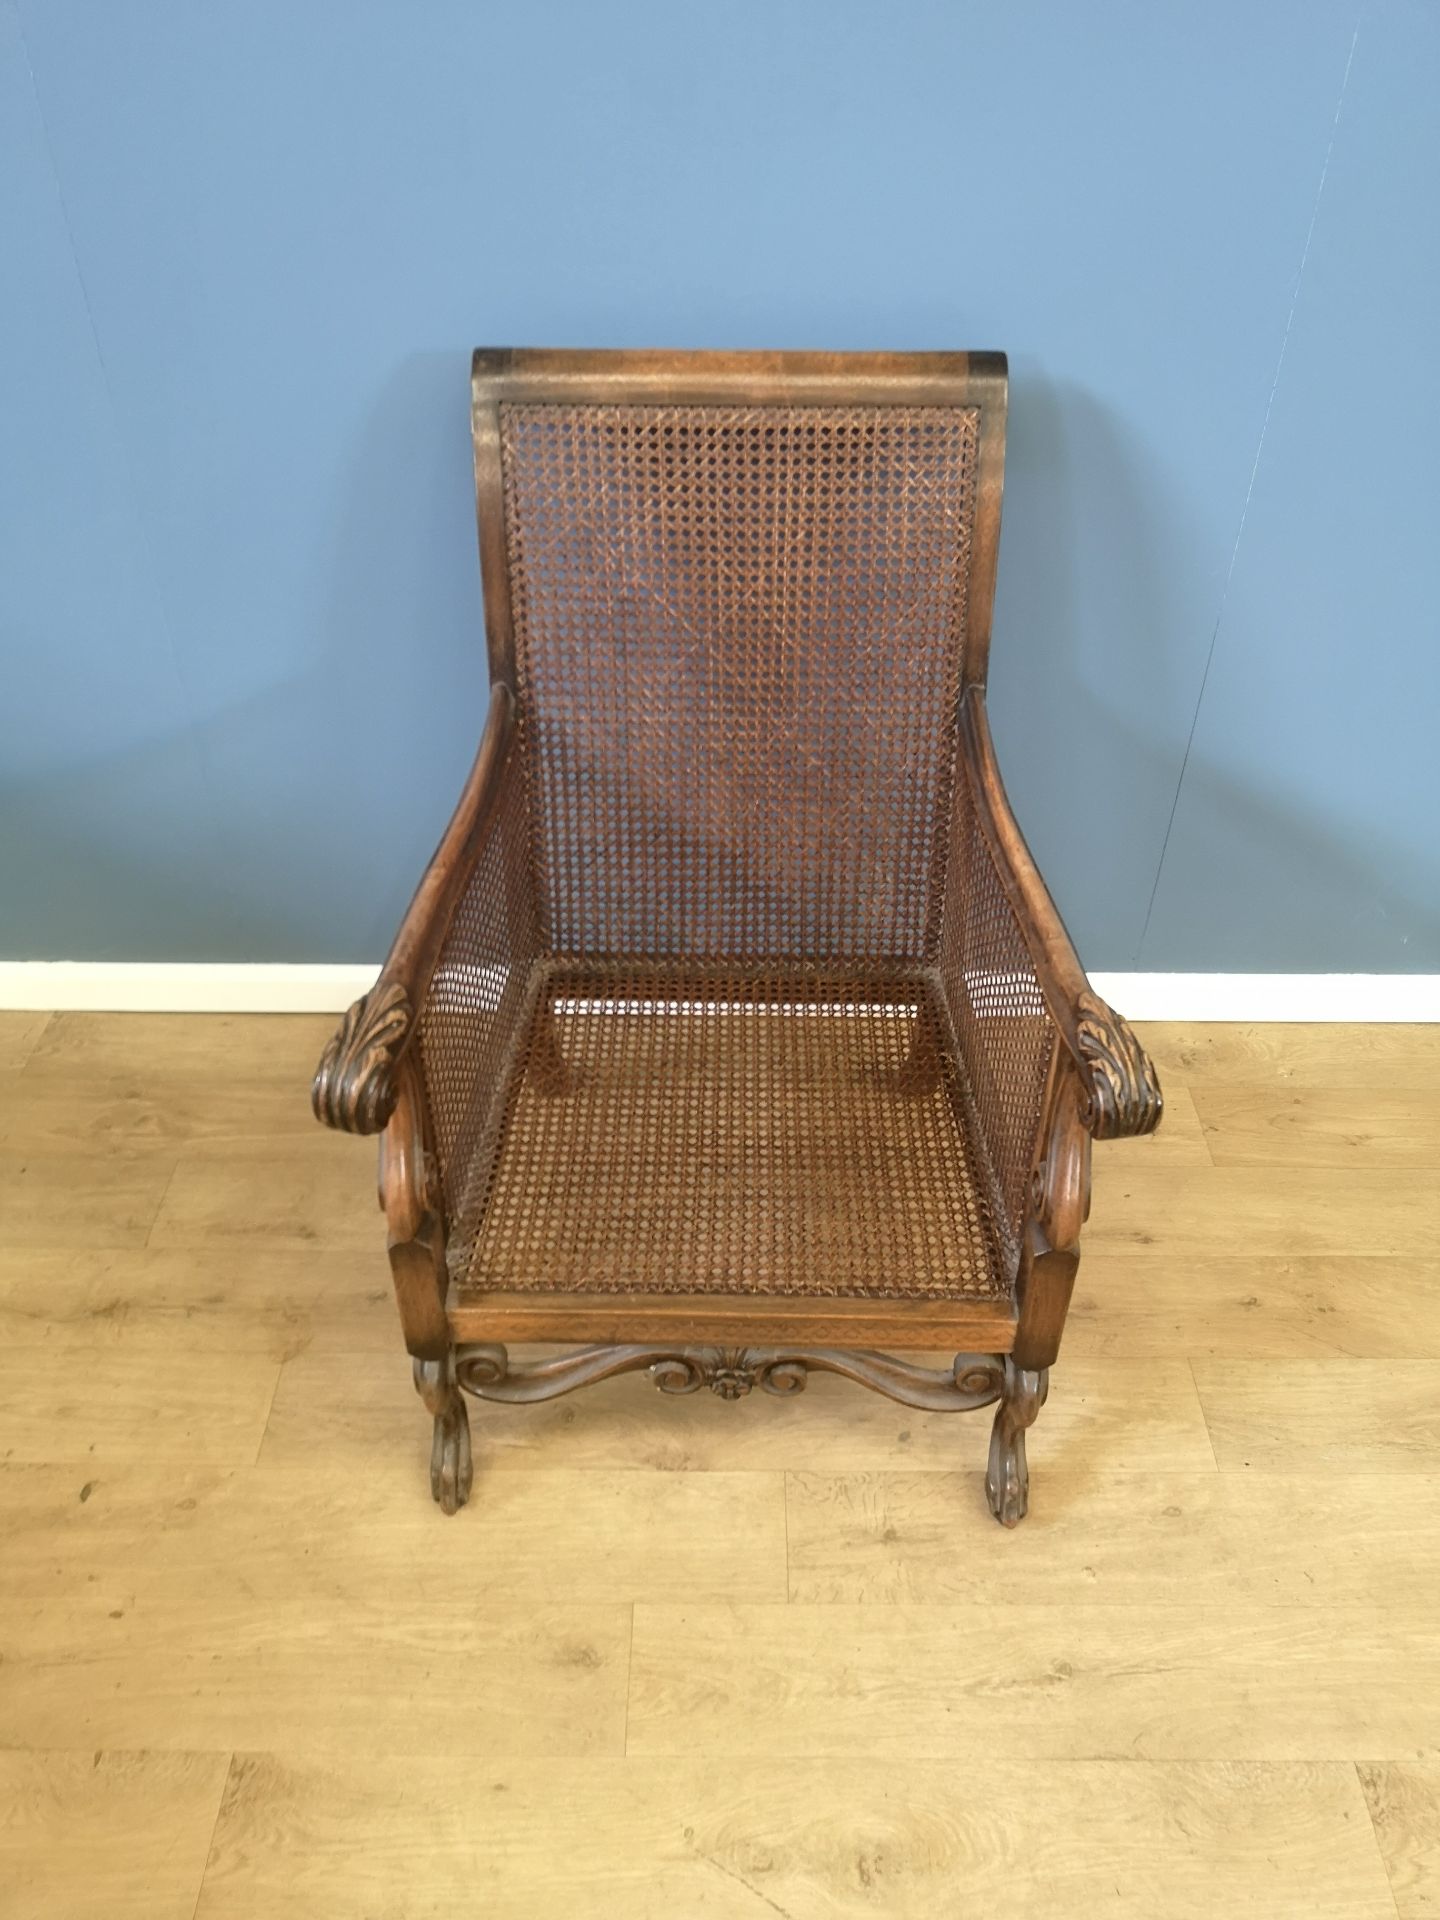 Mahogany armchair with cane seat - Image 2 of 5